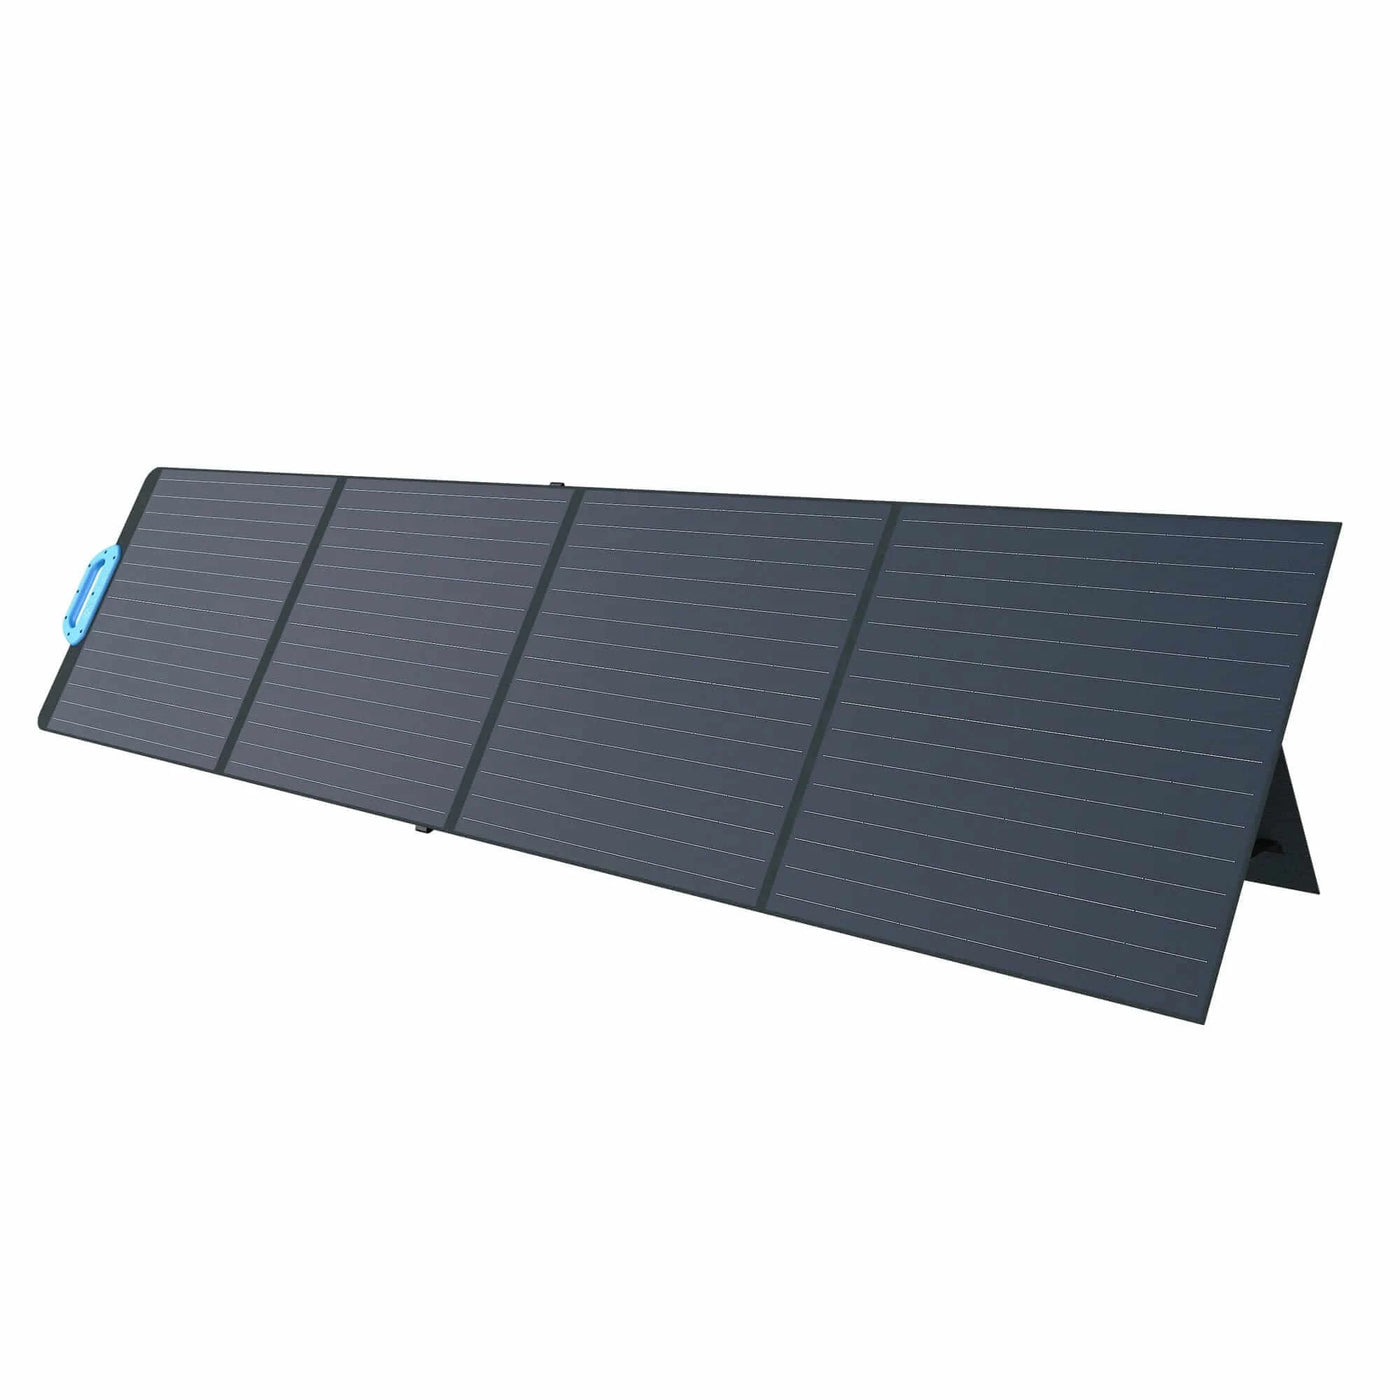 200 Watt Portable Solar Panel: Bluetti PV200 - Front Right View Fully Expanded